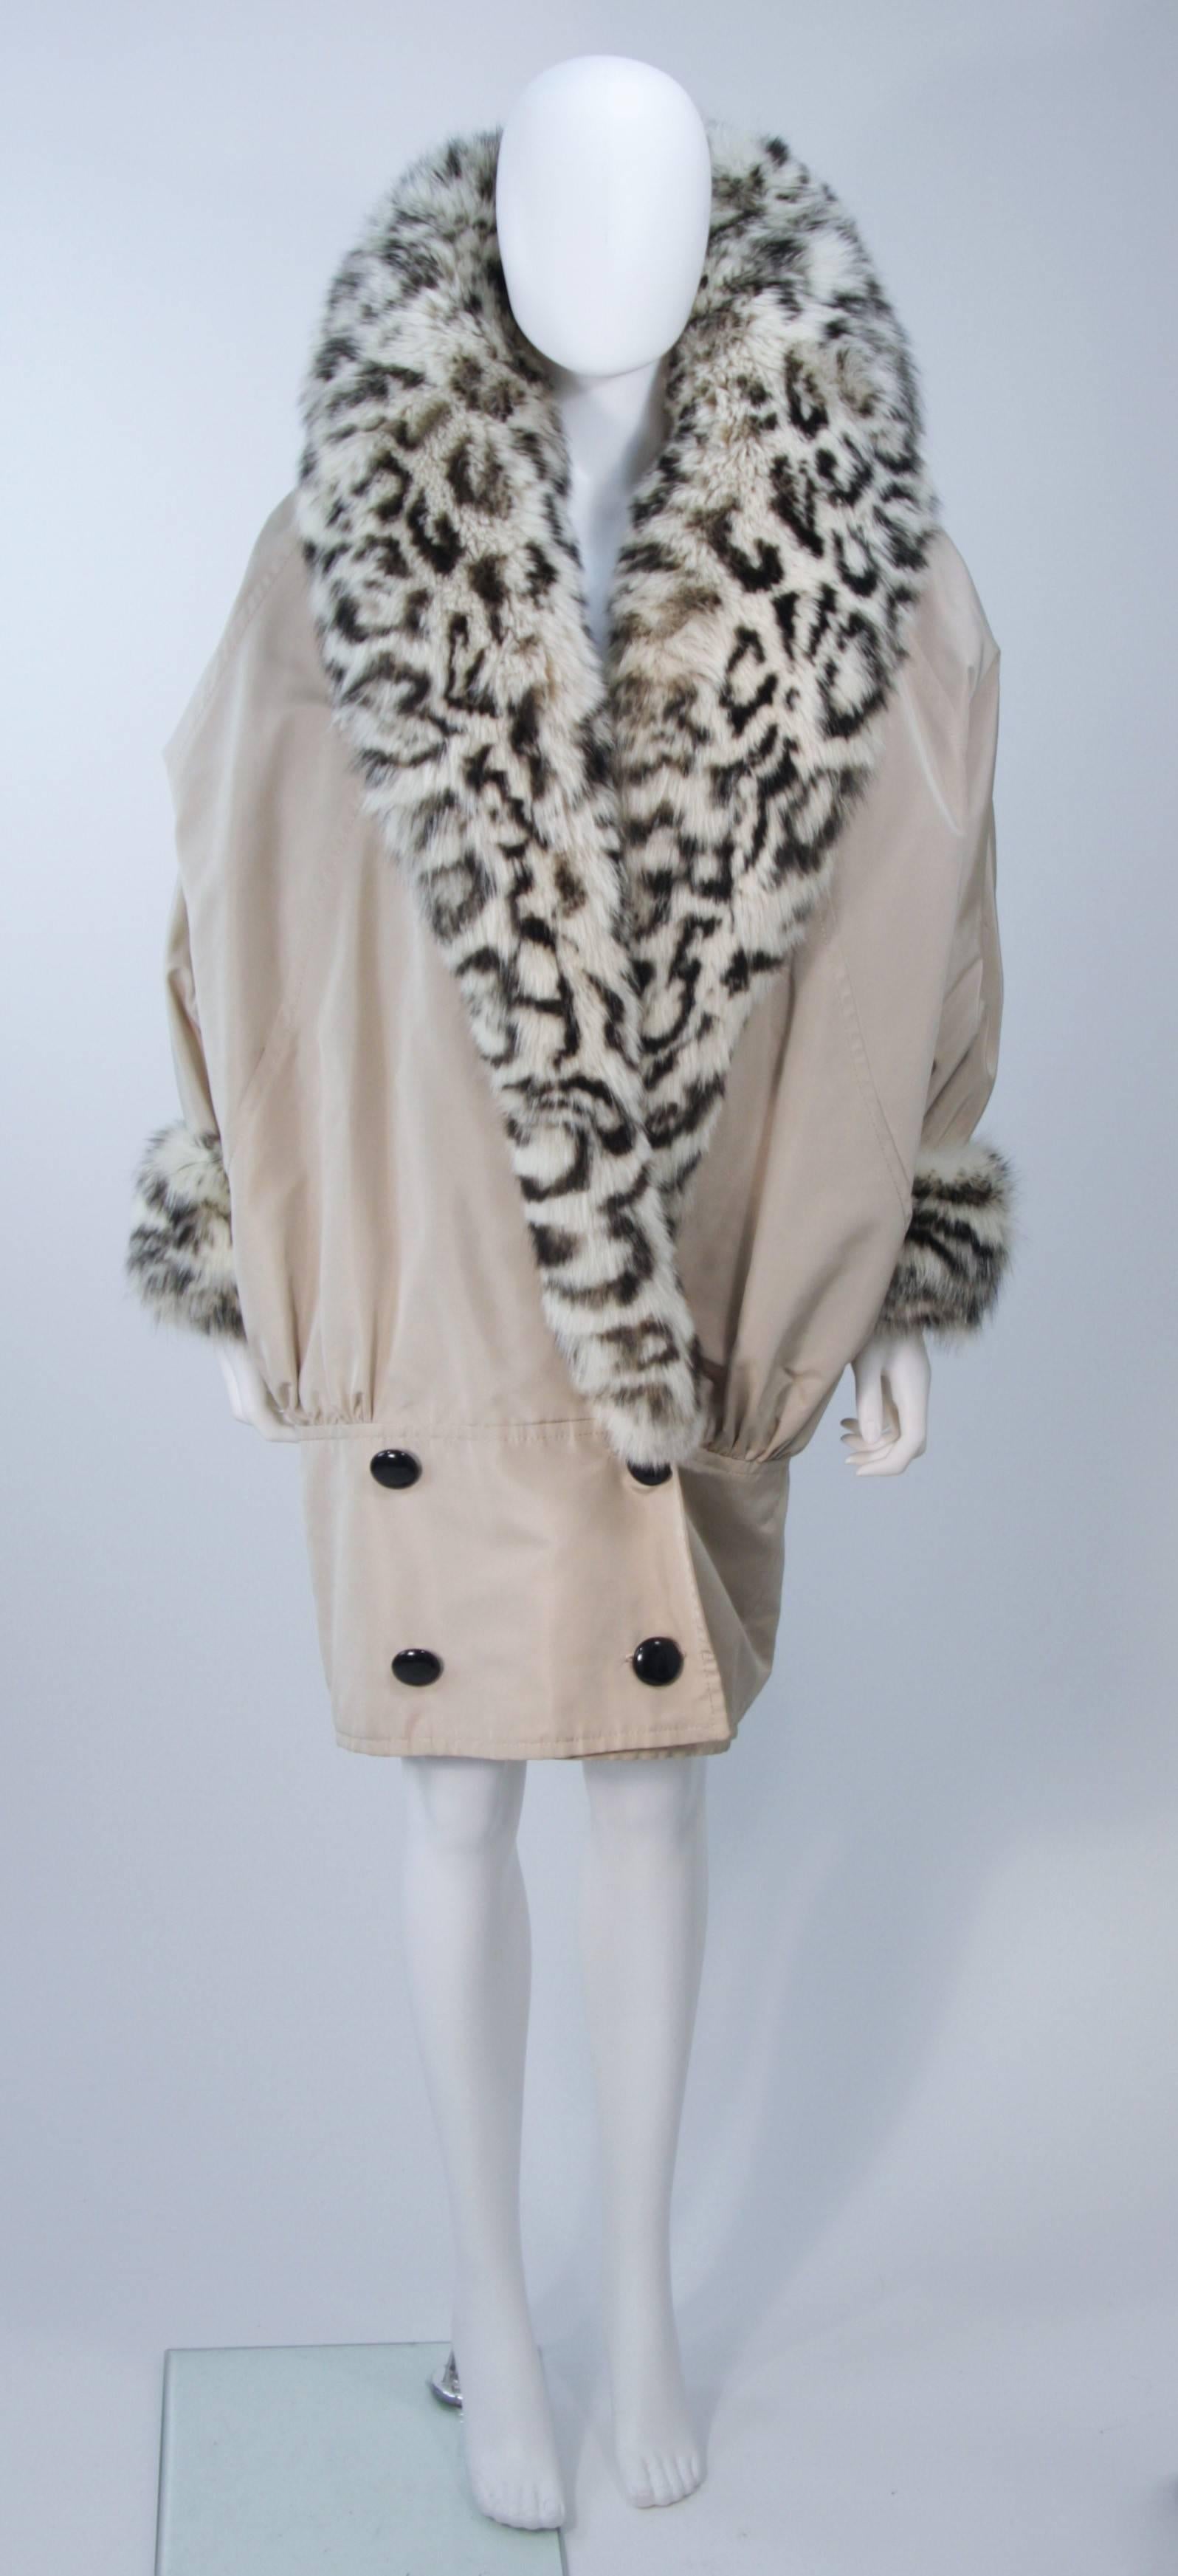 This Andrea Odicini coat is composed of a khaki nylon and features a patterned fox fur trim. There are button closures and side pockets. In excellent vintage condition. 

**Please cross-reference measurements for personal accuracy. 

Measures